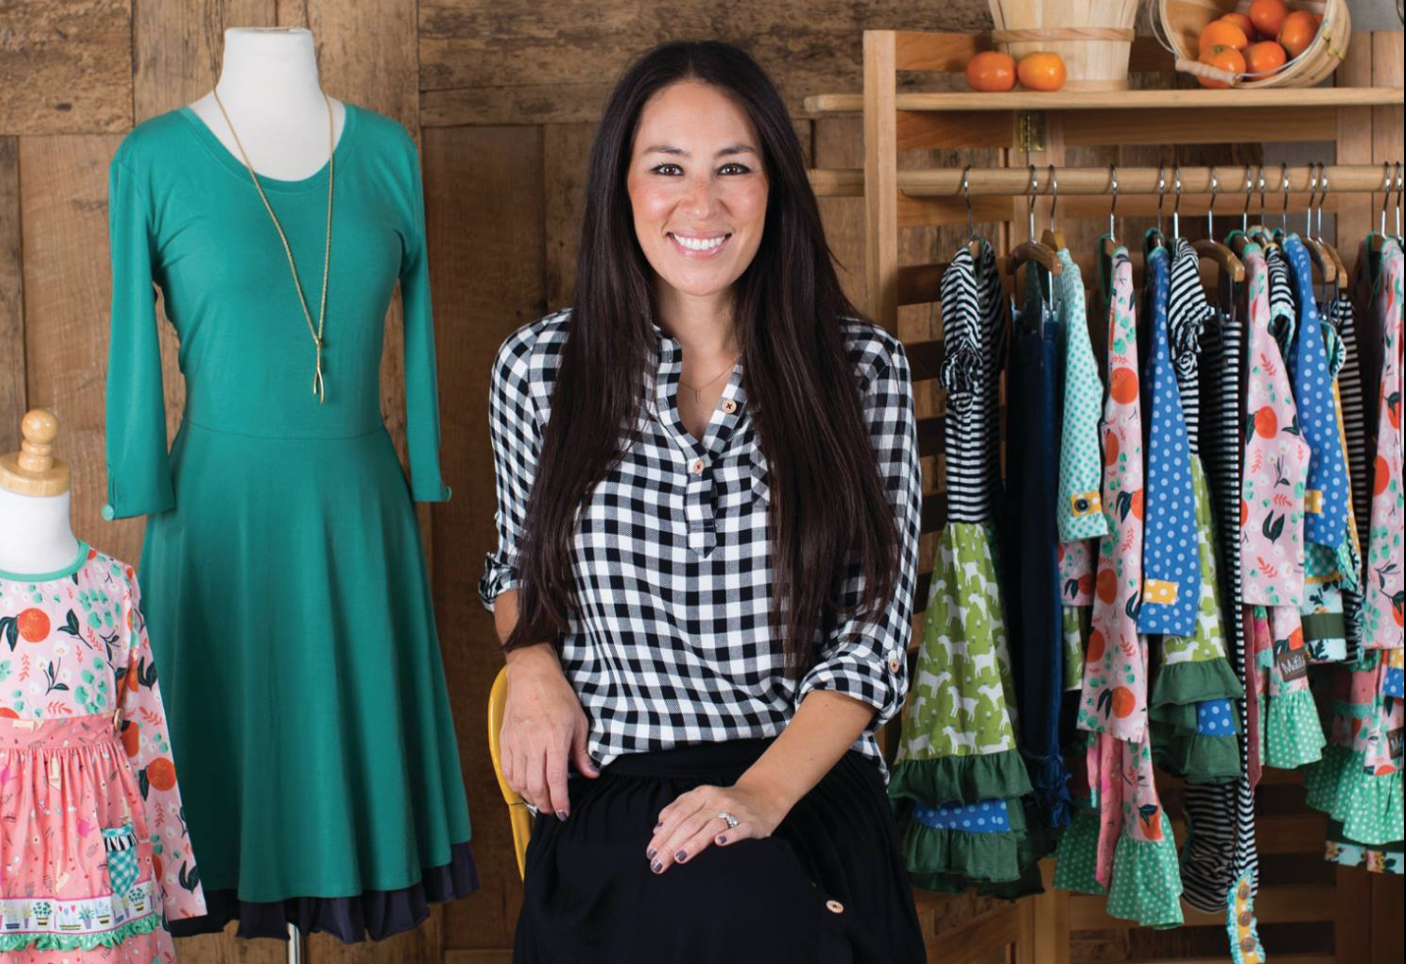 Fixer Upper Star Joanna Gaines' Adorable Matilda Jane Clothing Collection